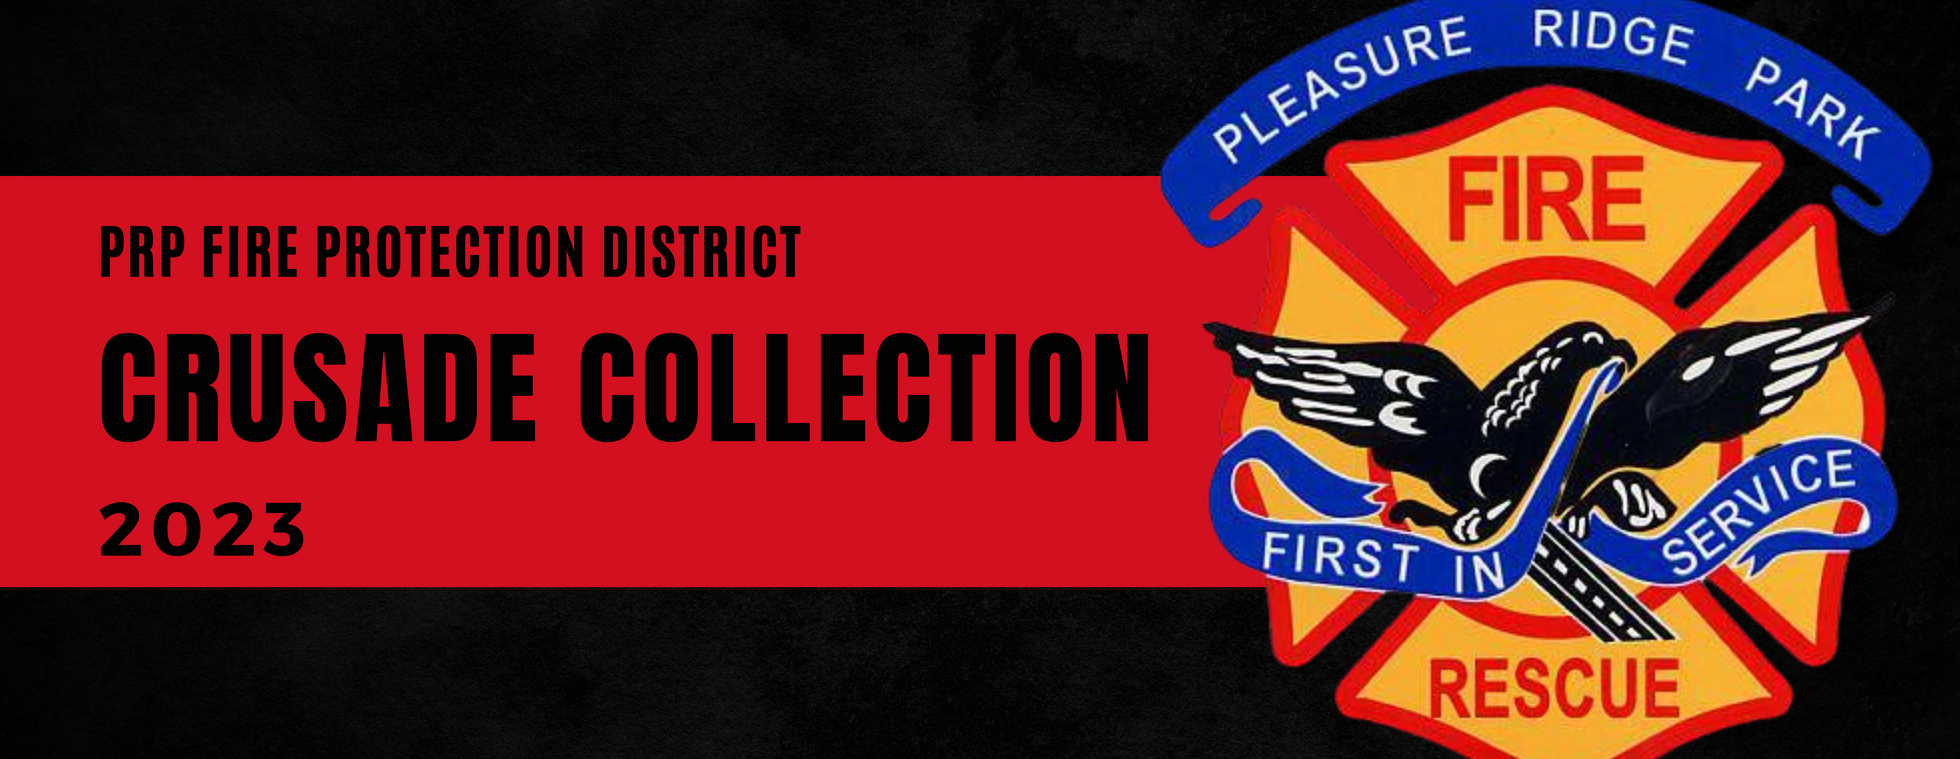 PRP Fire Protection District 